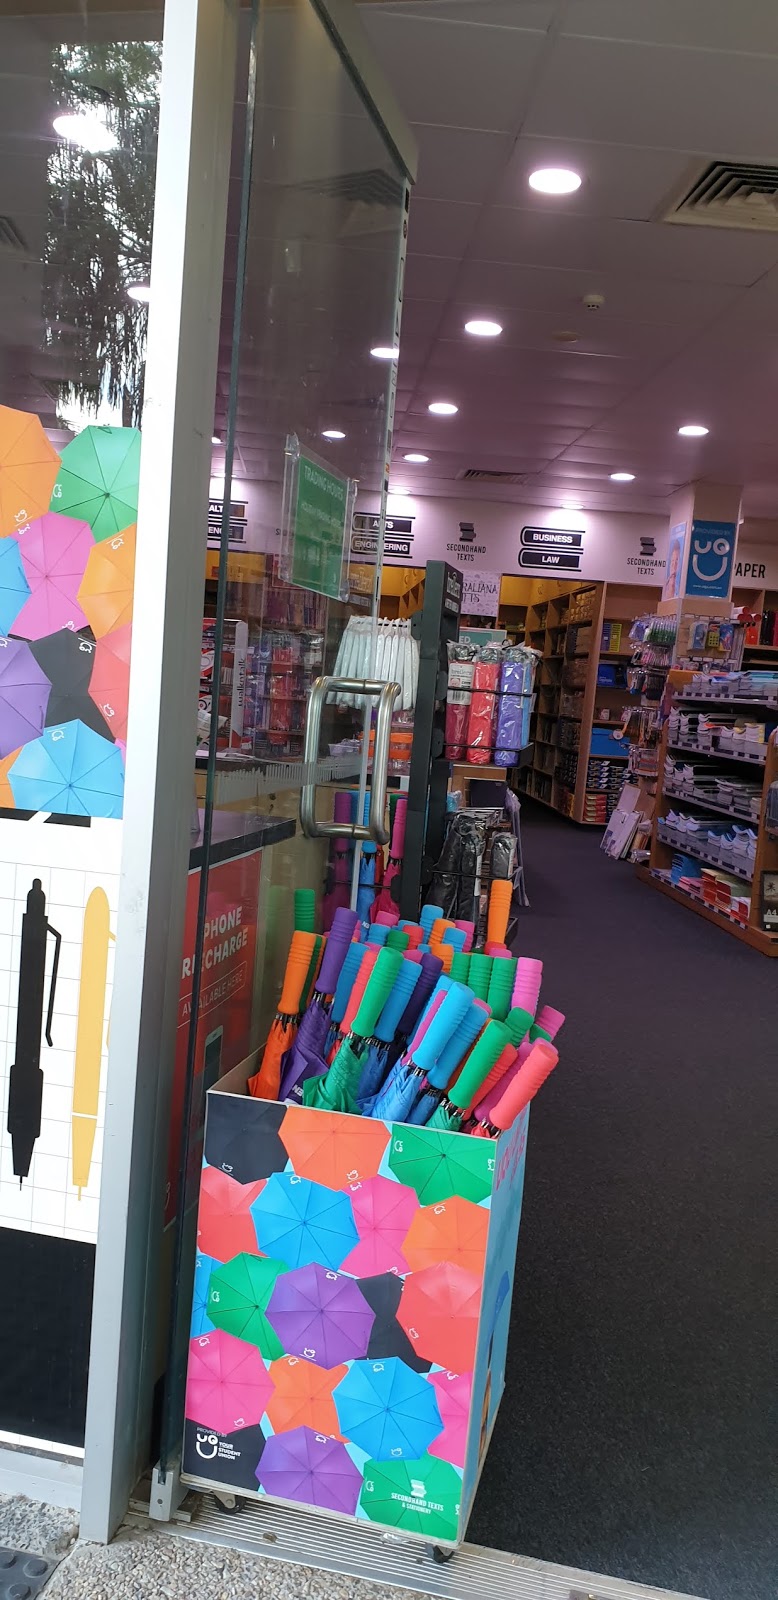 UQU Secondhand Texts & Stationery | Union Complex Building 21a, The University of Queensland, Campbell Rd, St Lucia QLD 4067, Australia | Phone: (07) 3377 2243